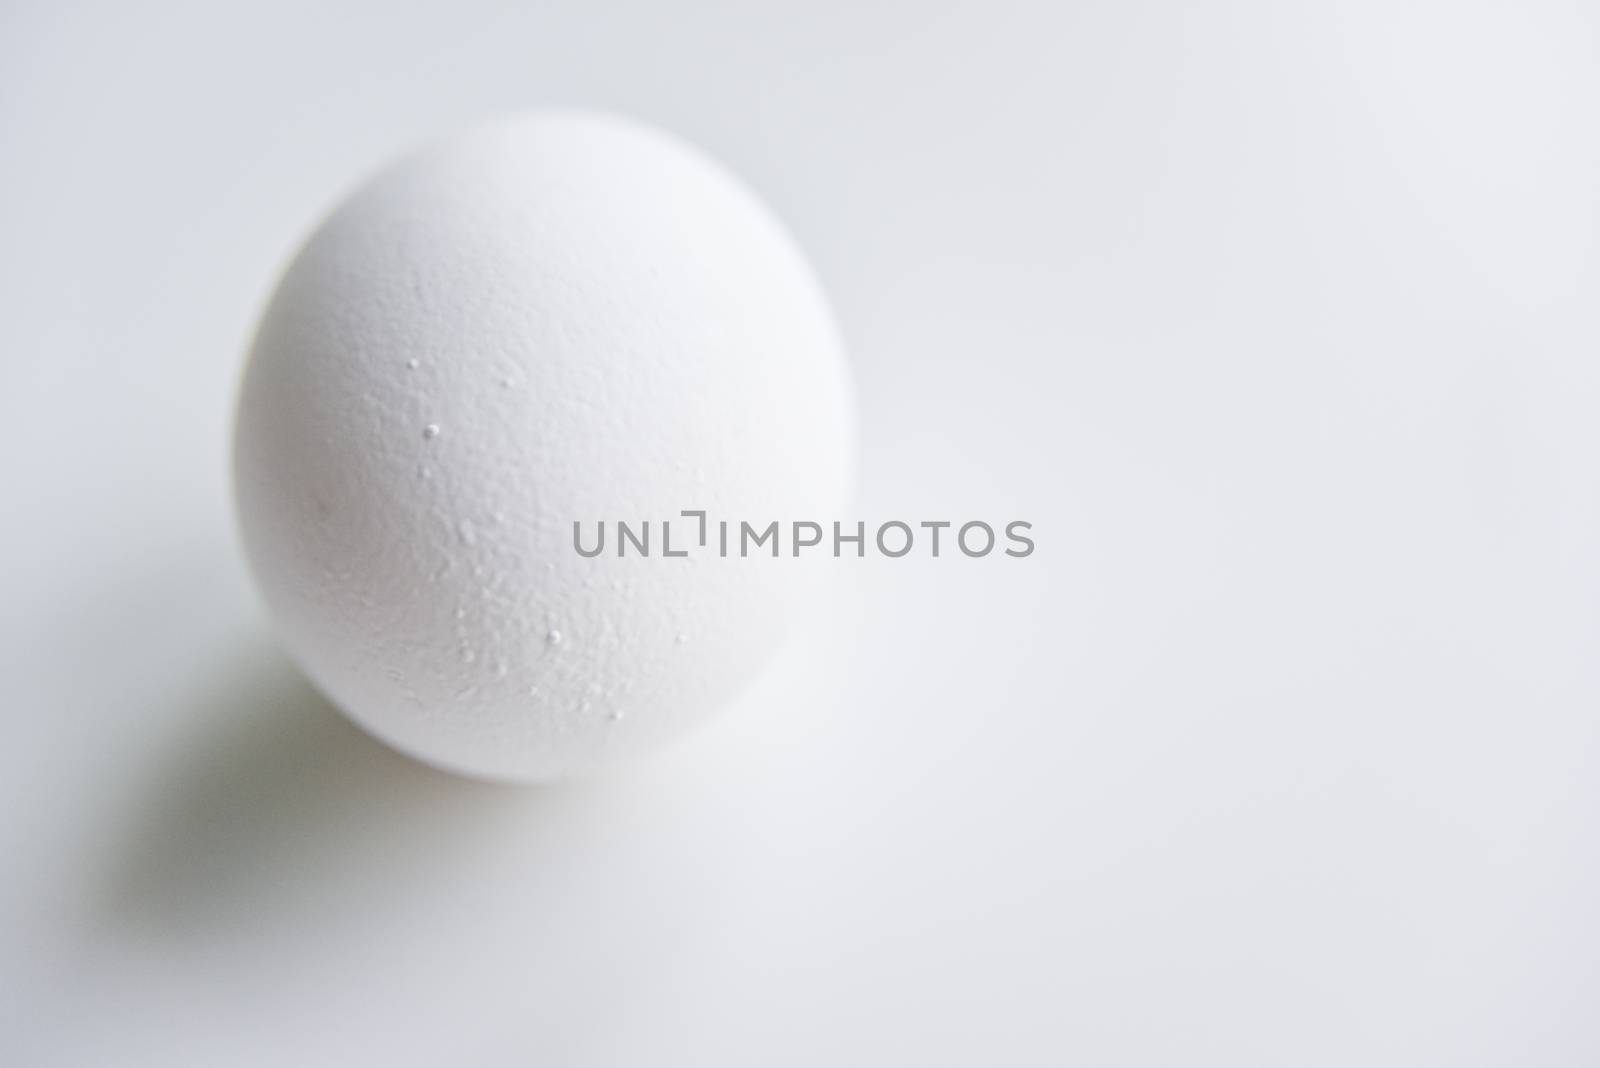 selective focus at the white egg in the hand by yulia_sanatina